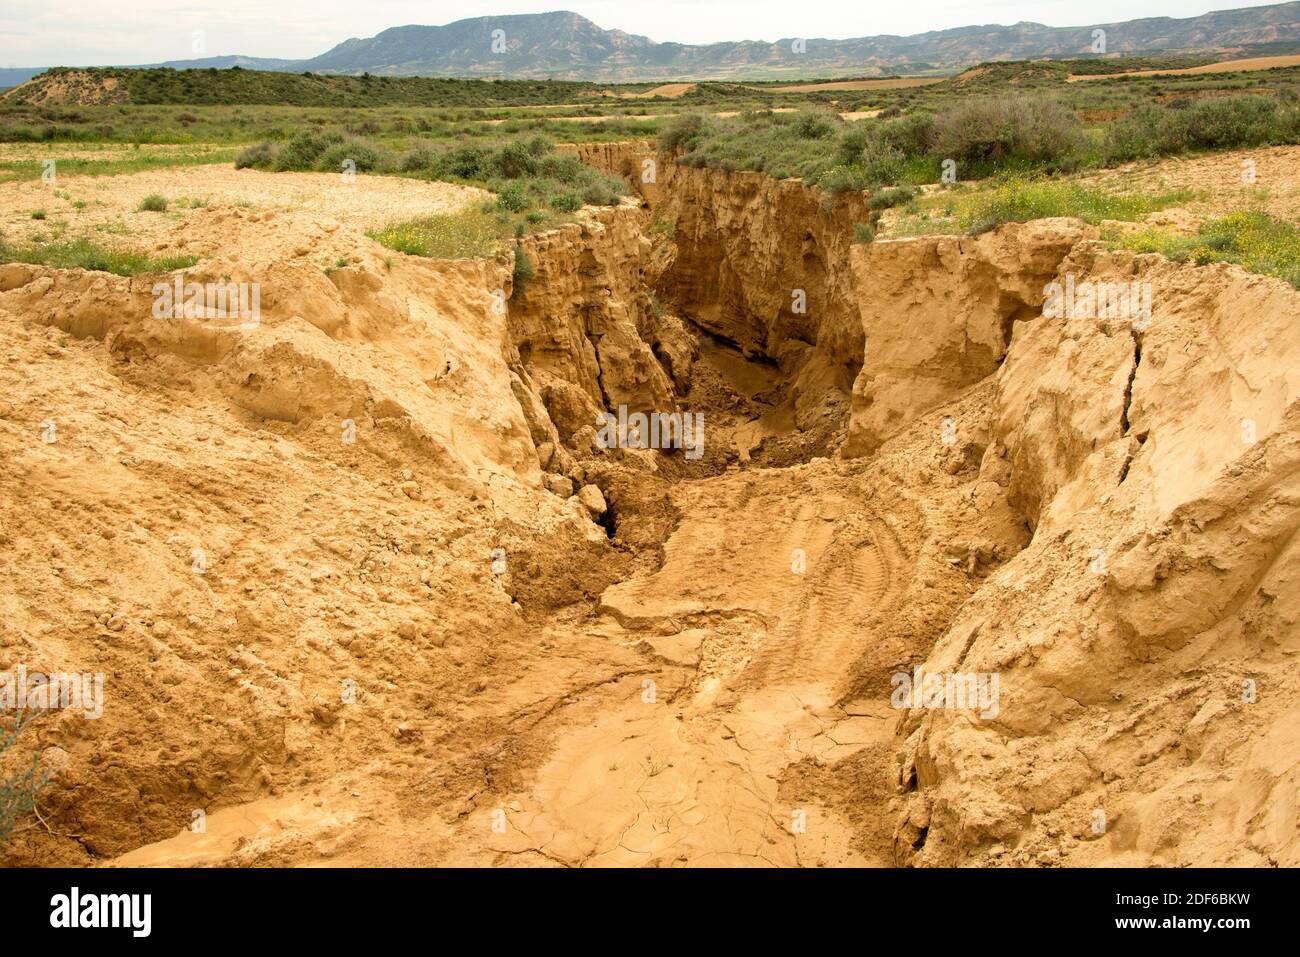 Wadi or rambla is an intermittent stream characteristic of arid climates. This photo was taken in Bardenas Reales, Navarra, Spain. Stock Photo